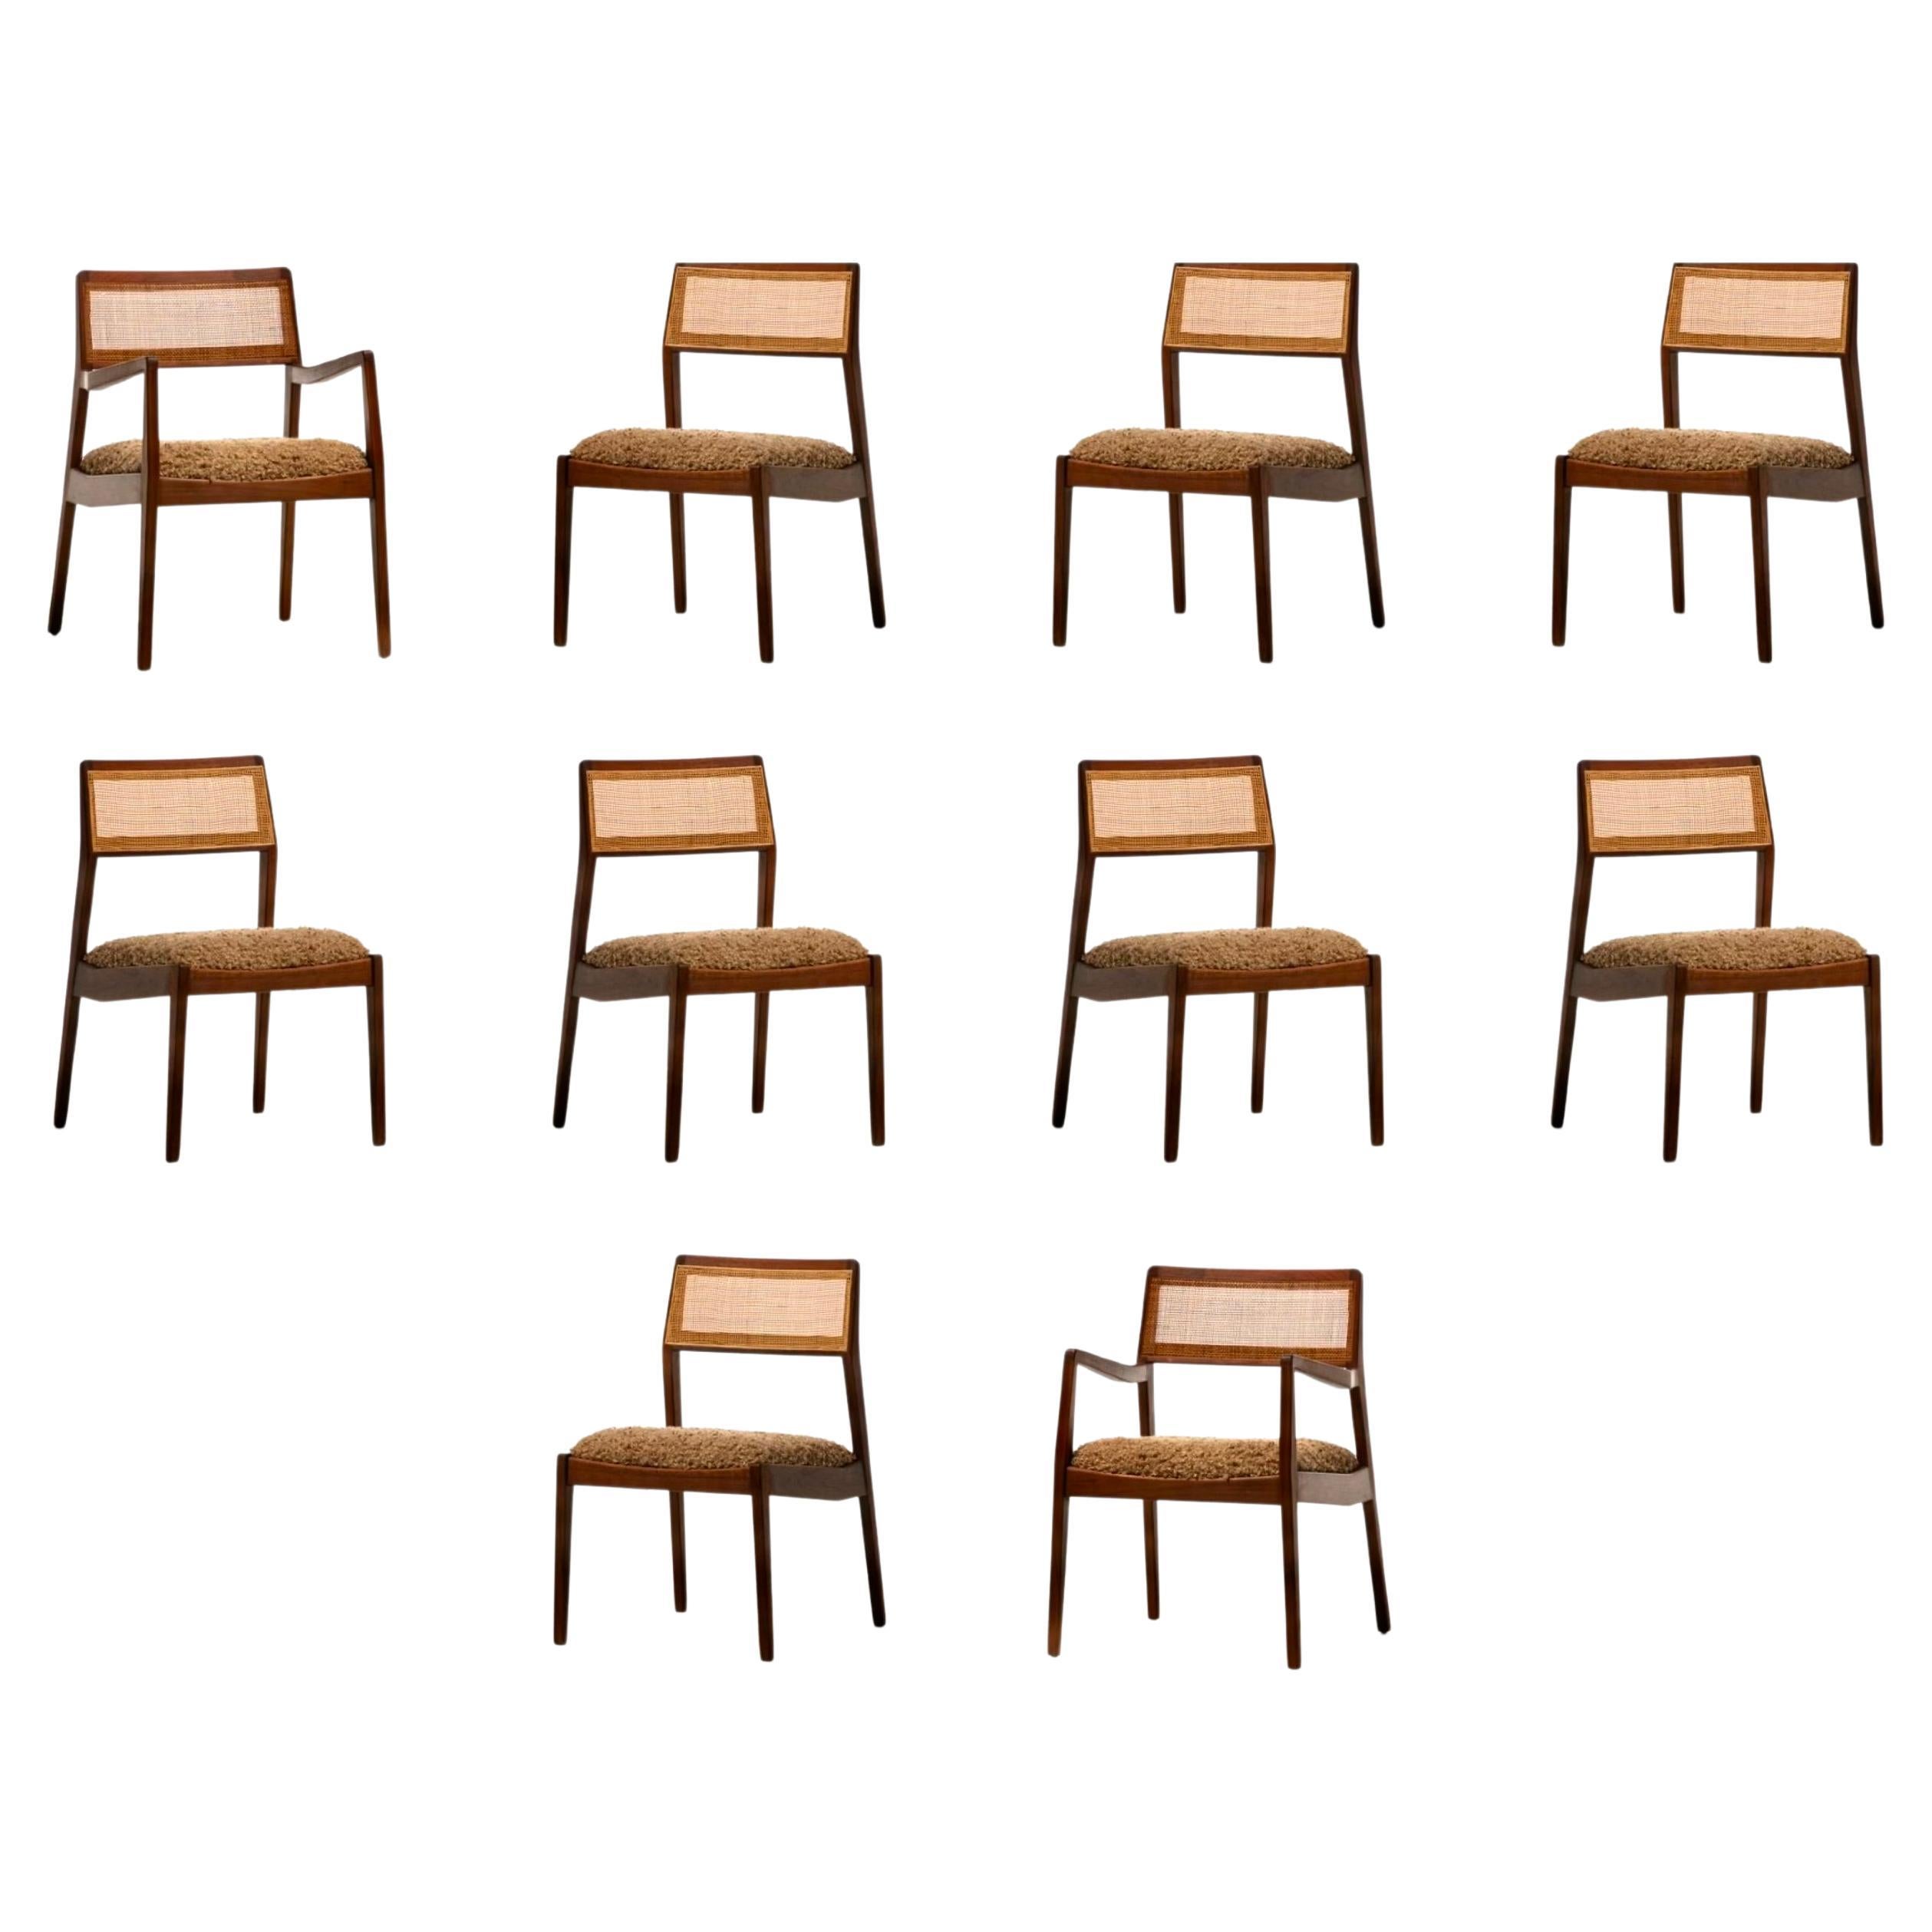 Set of 10 Fully Restored Jens Risom Mid-Century Modern Playboy Dining Chairs